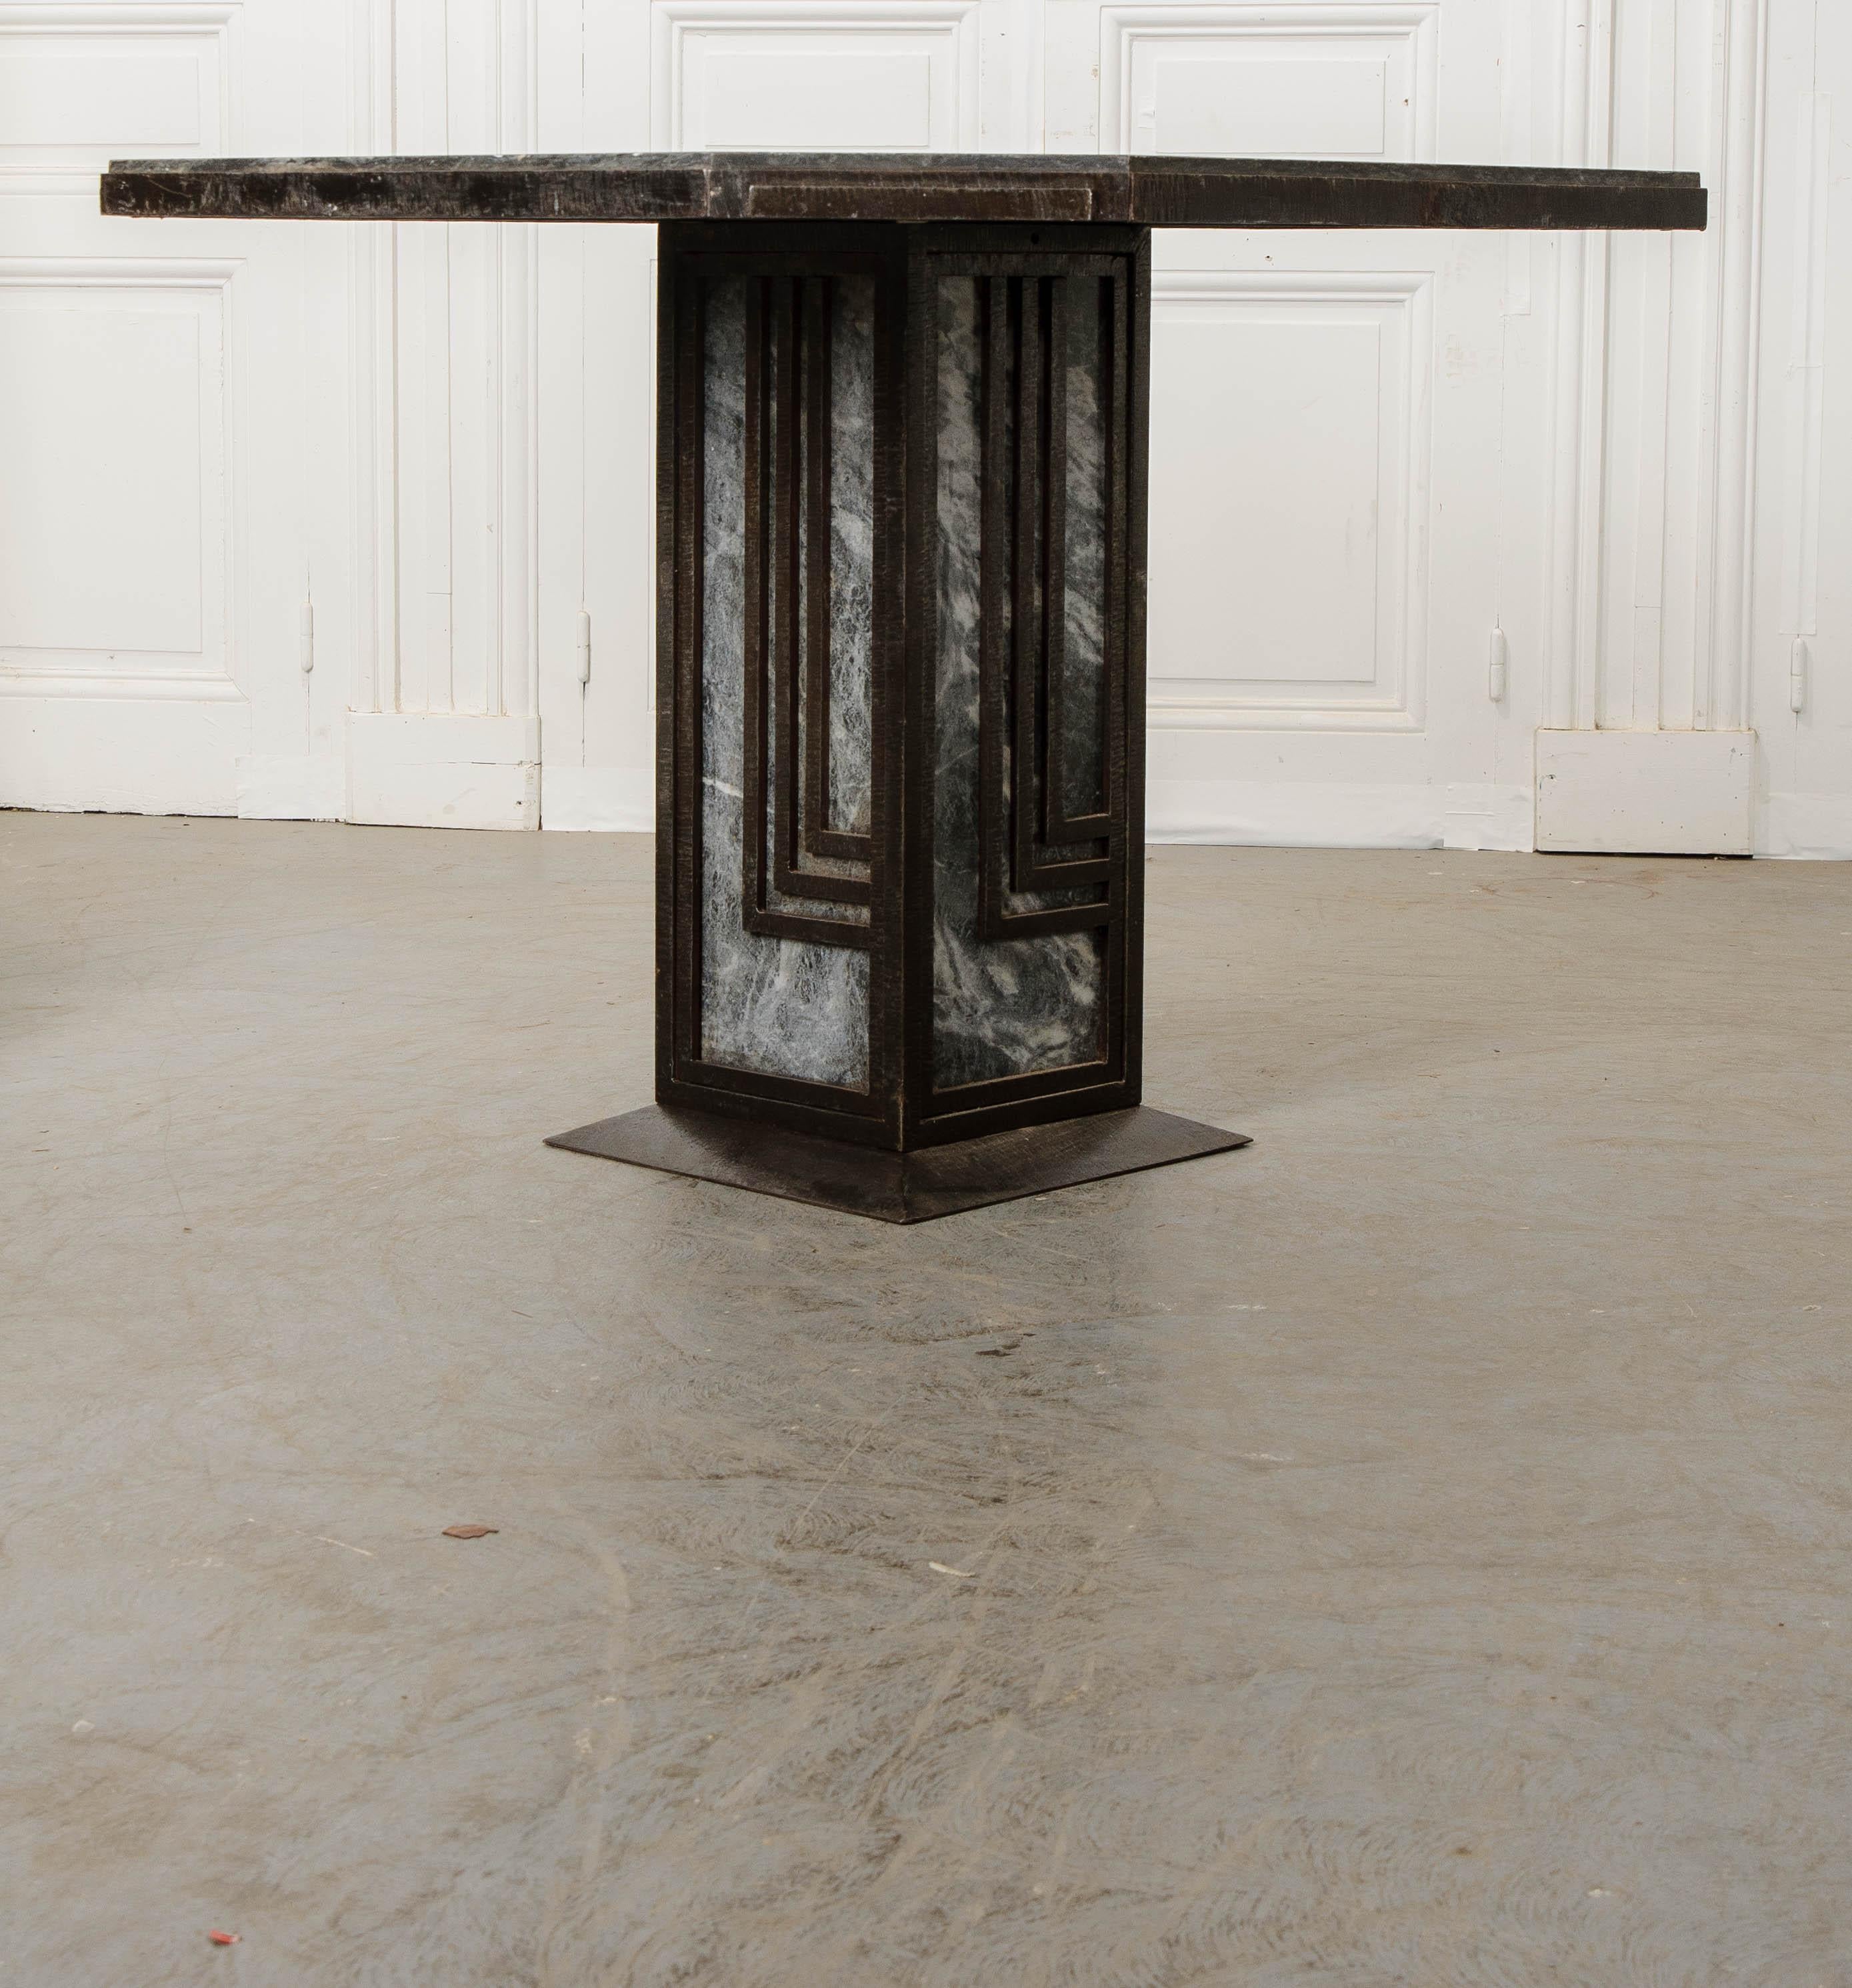 An octagonal shape provides this stylish French Art Deco dining table with a fabulous geometric silhouette. The table has a frame made of black painted iron that holds all of the heavy marble where it needs to be. The Sainte-Anne marble is gray in